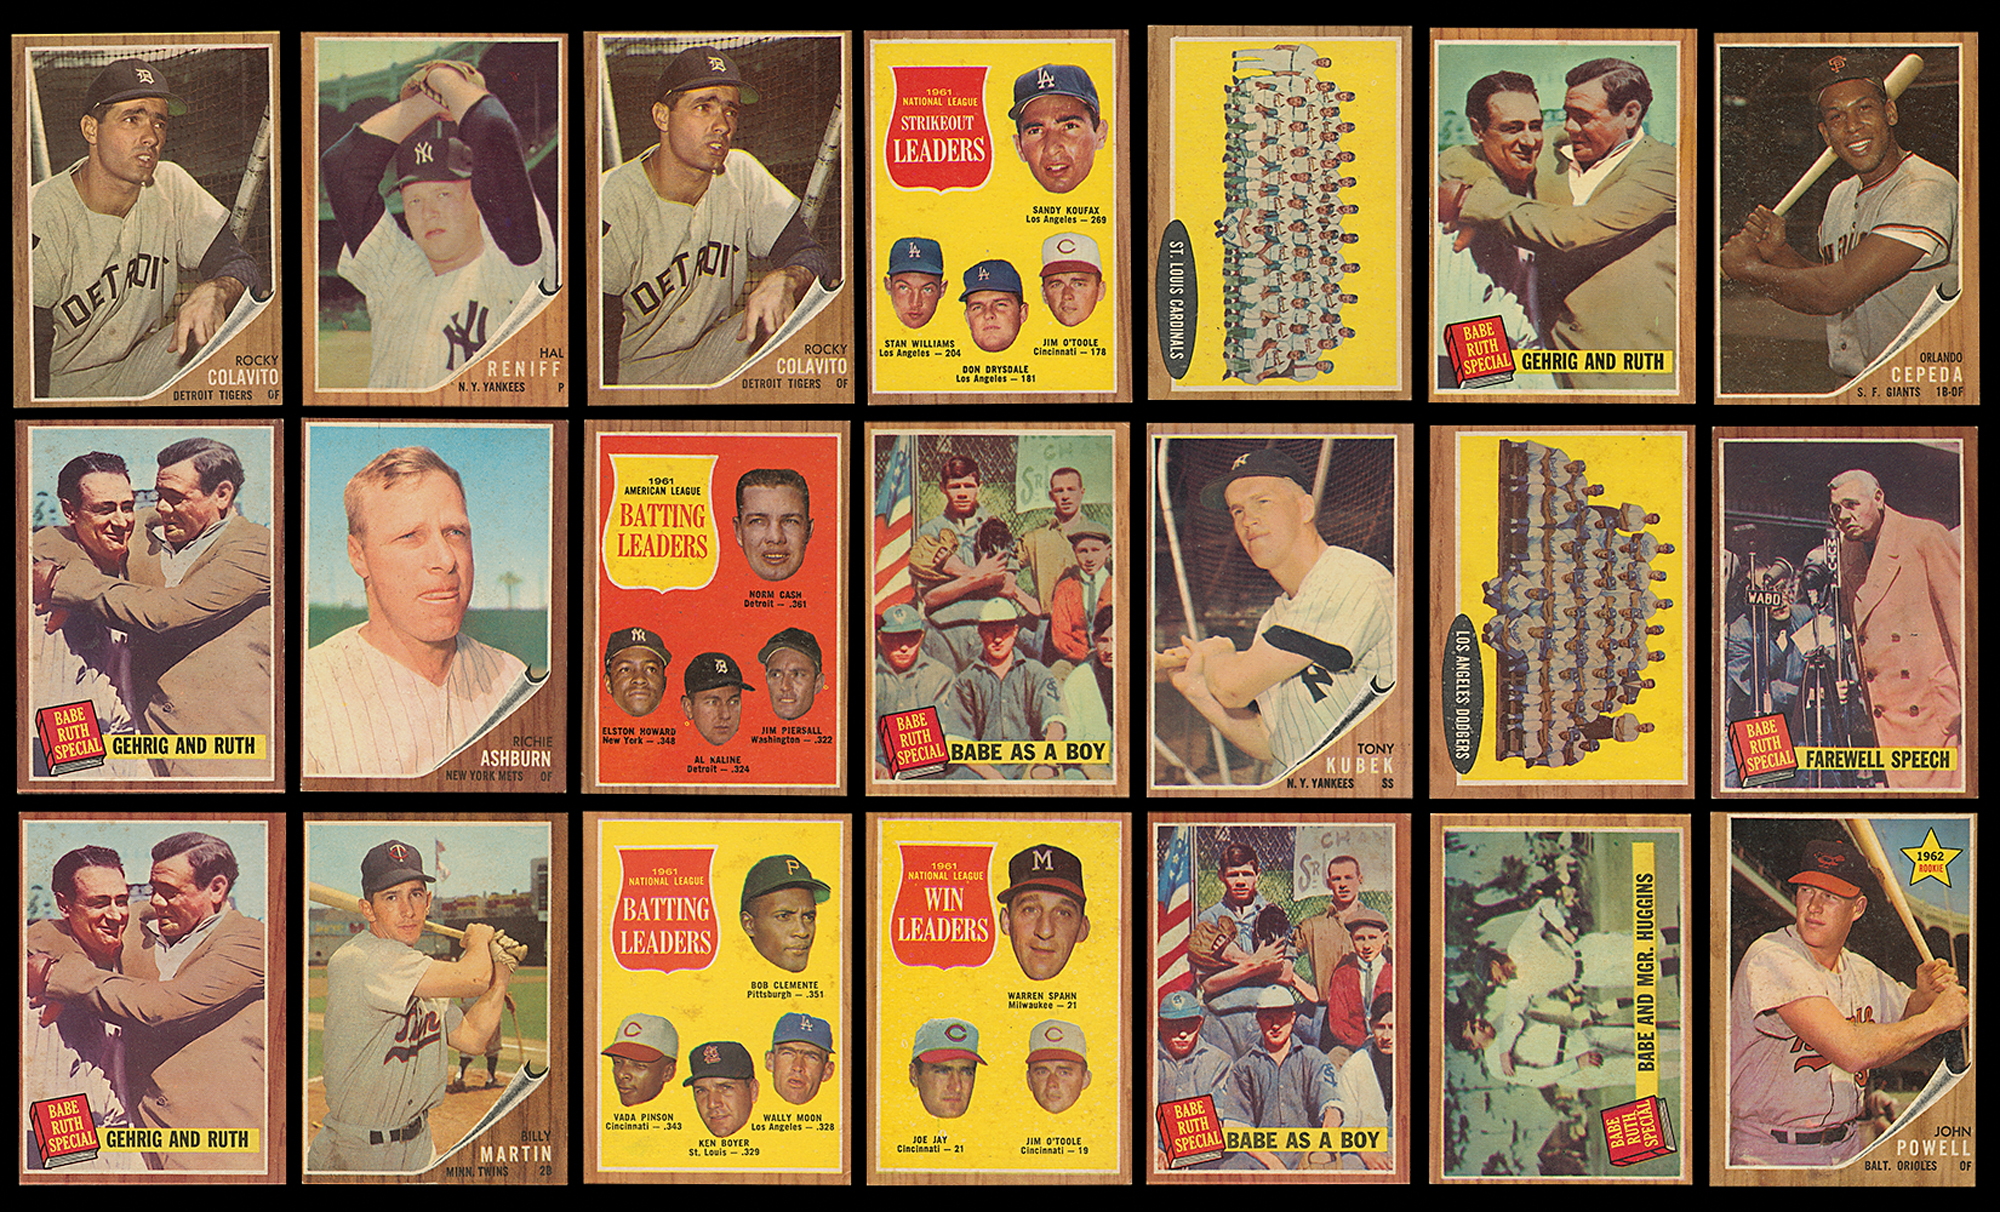 Lot #860 1962 Topps Mid-Grade Baseball Card Collection (3,800+) with HOF, Checklists, Leaders, and High #s